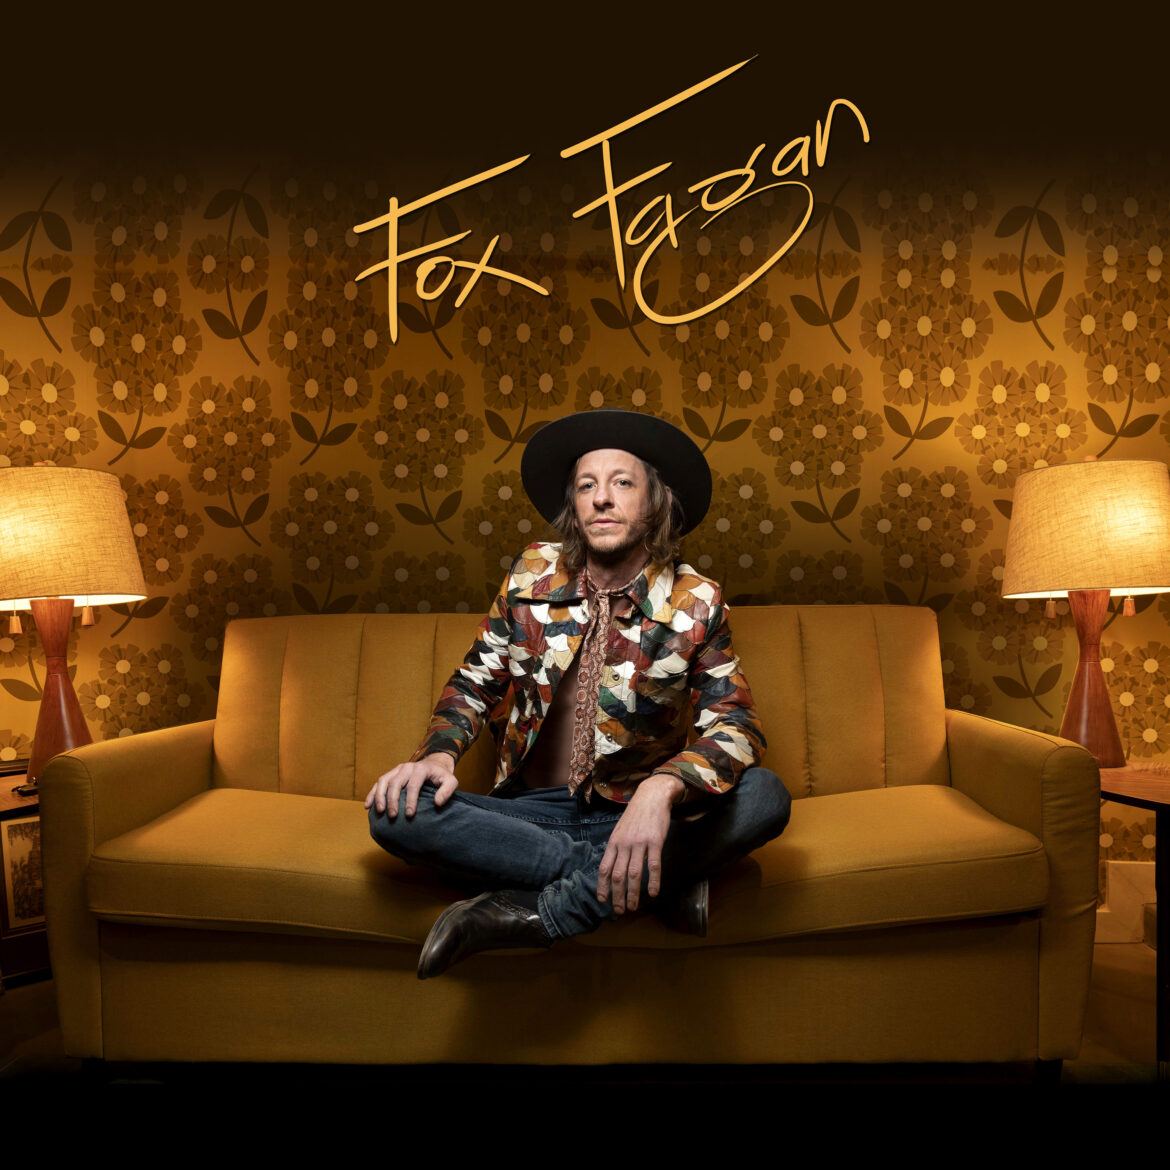 Fox Fagen Releases New Melodic Track “Let’s Get Lost”